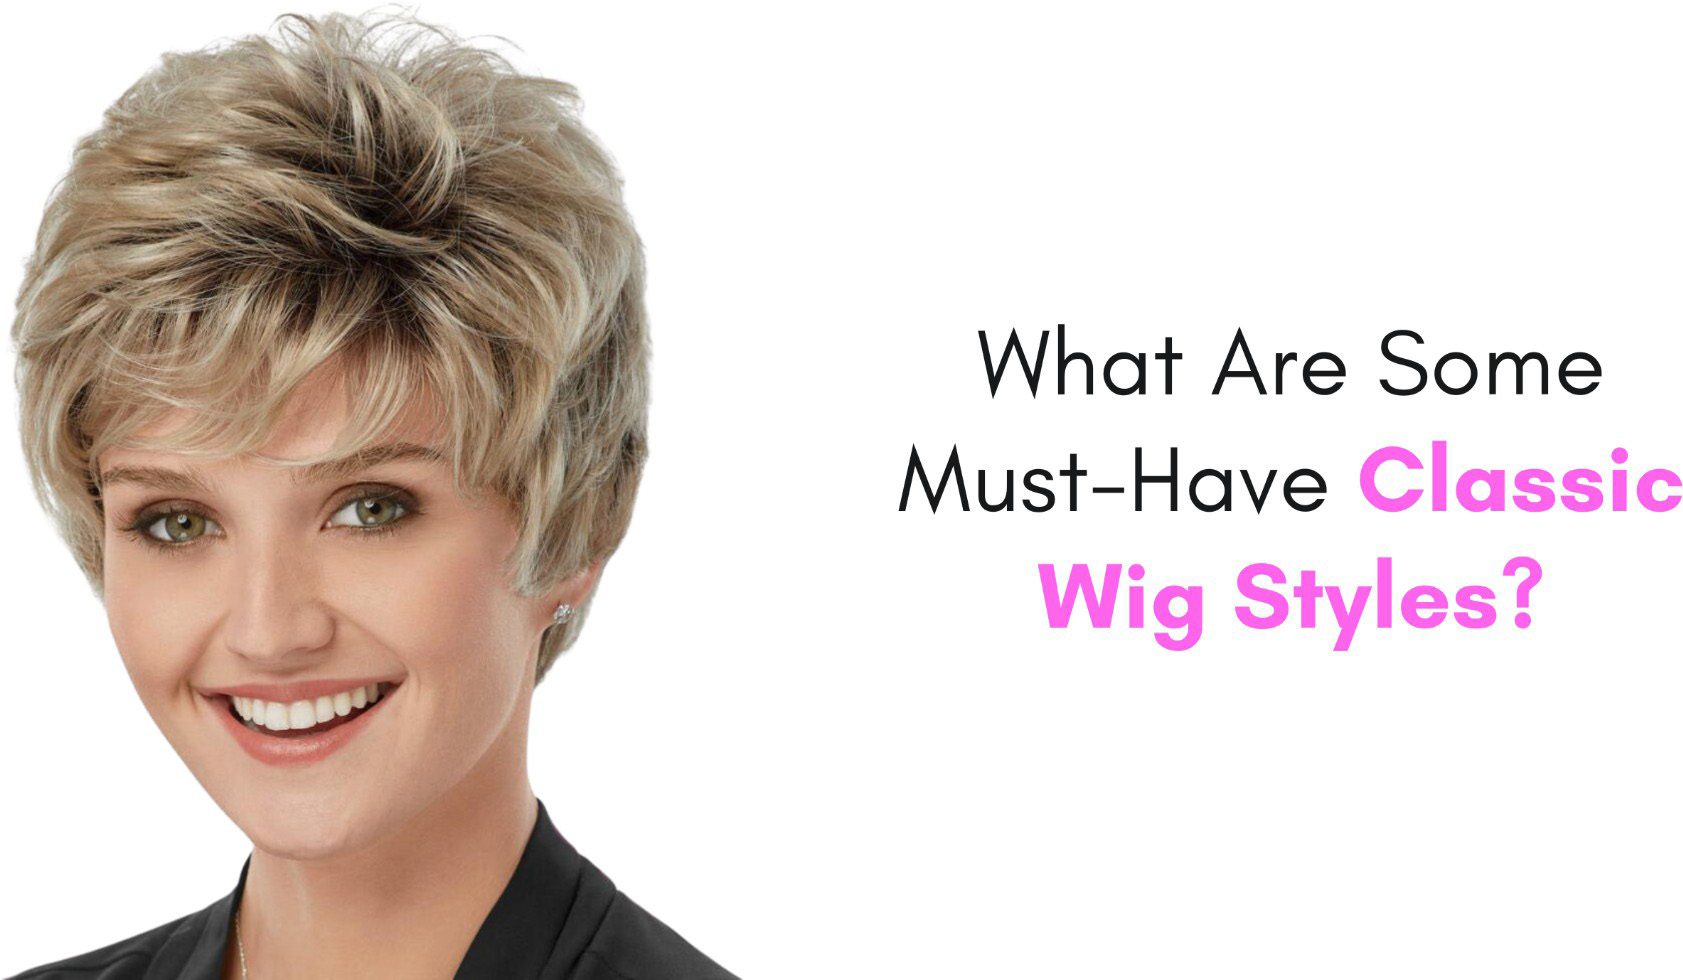 What Are Some Must-Have Classic Wig Styles?